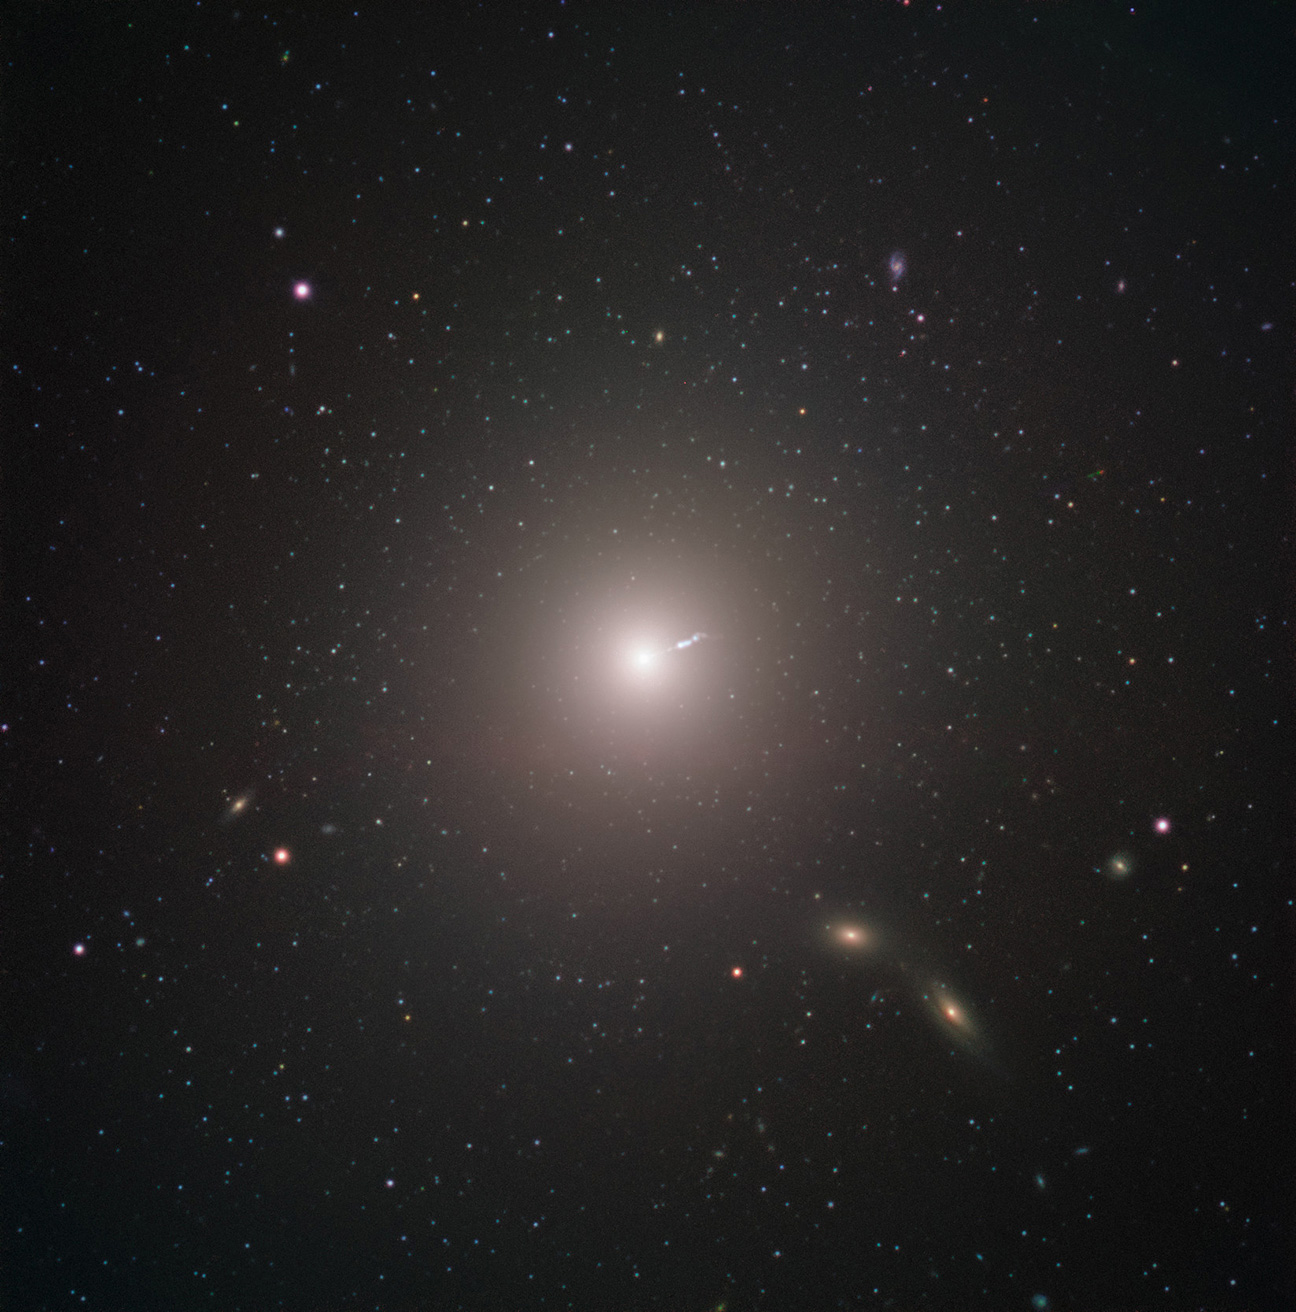 Image of galaxy with jet of light emerging